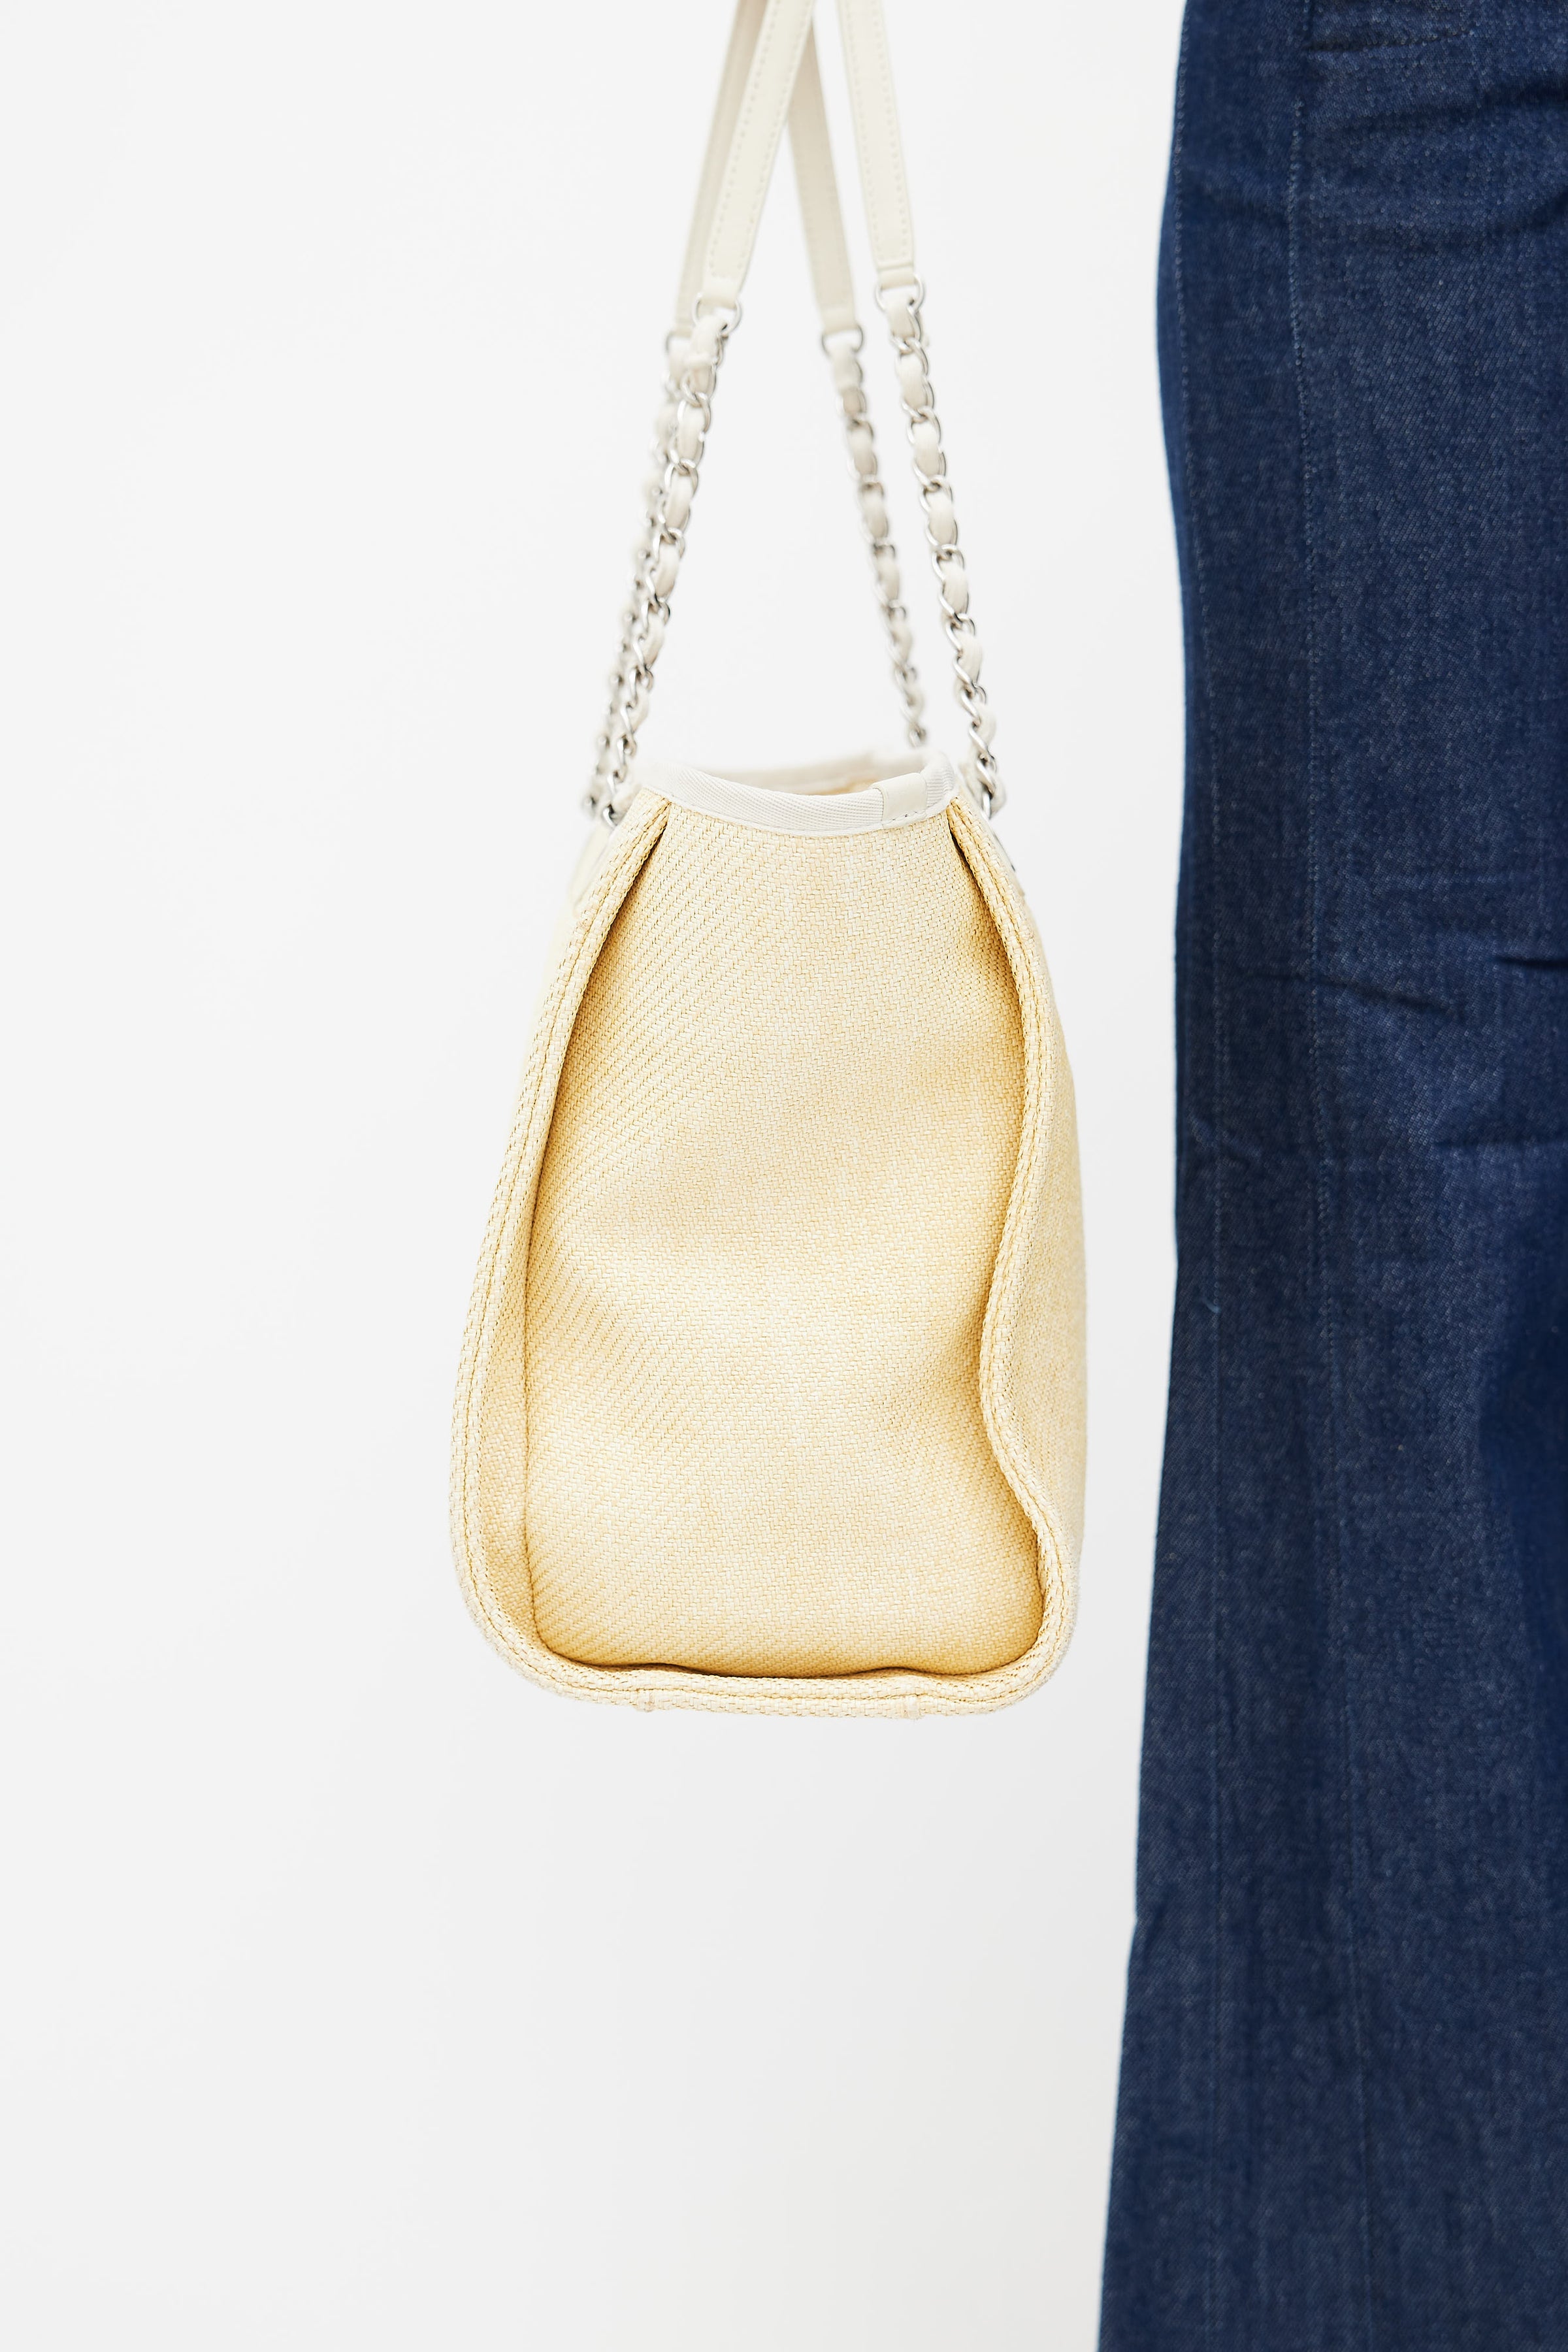 Chanel // 2013 Yellow Small Deauville Canvas Tote – VSP Consignment